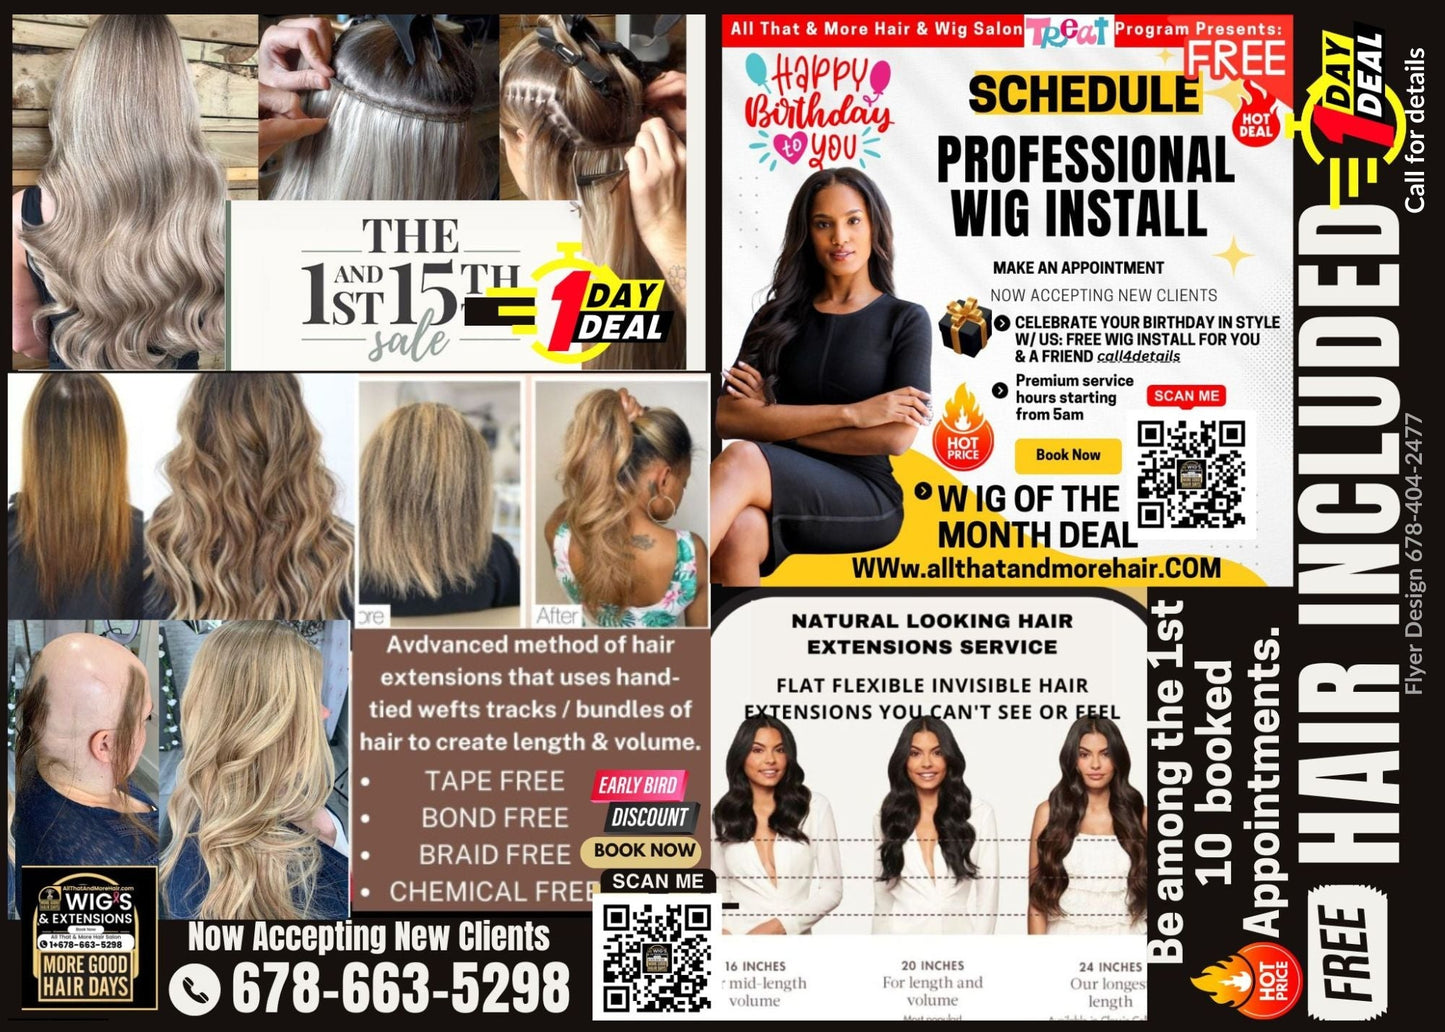 Unlock Your Hair's Potential: Hair Consultation & Scalp Evaluation + Hair Extension/Alternative Solutions Consultation (In-Person Showroom Visit)